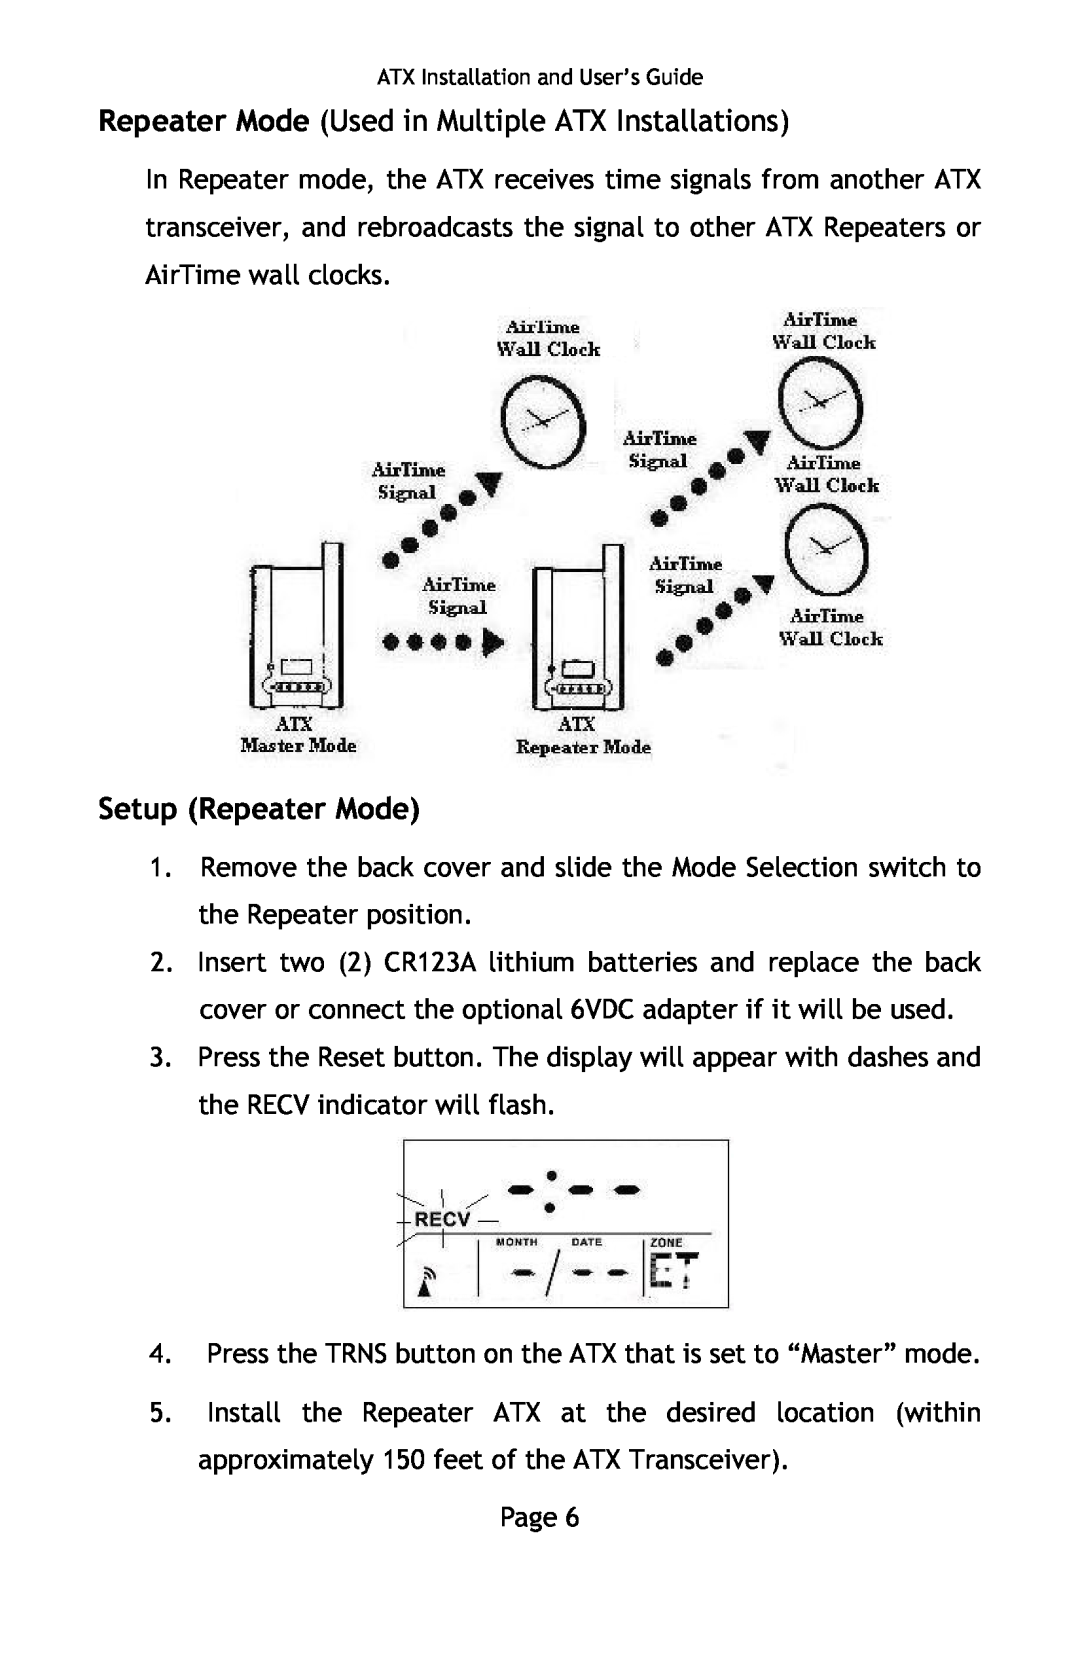 Lathem manual Repeater Mode Used in Multiple ATX Installations, Setup Repeater Mode 